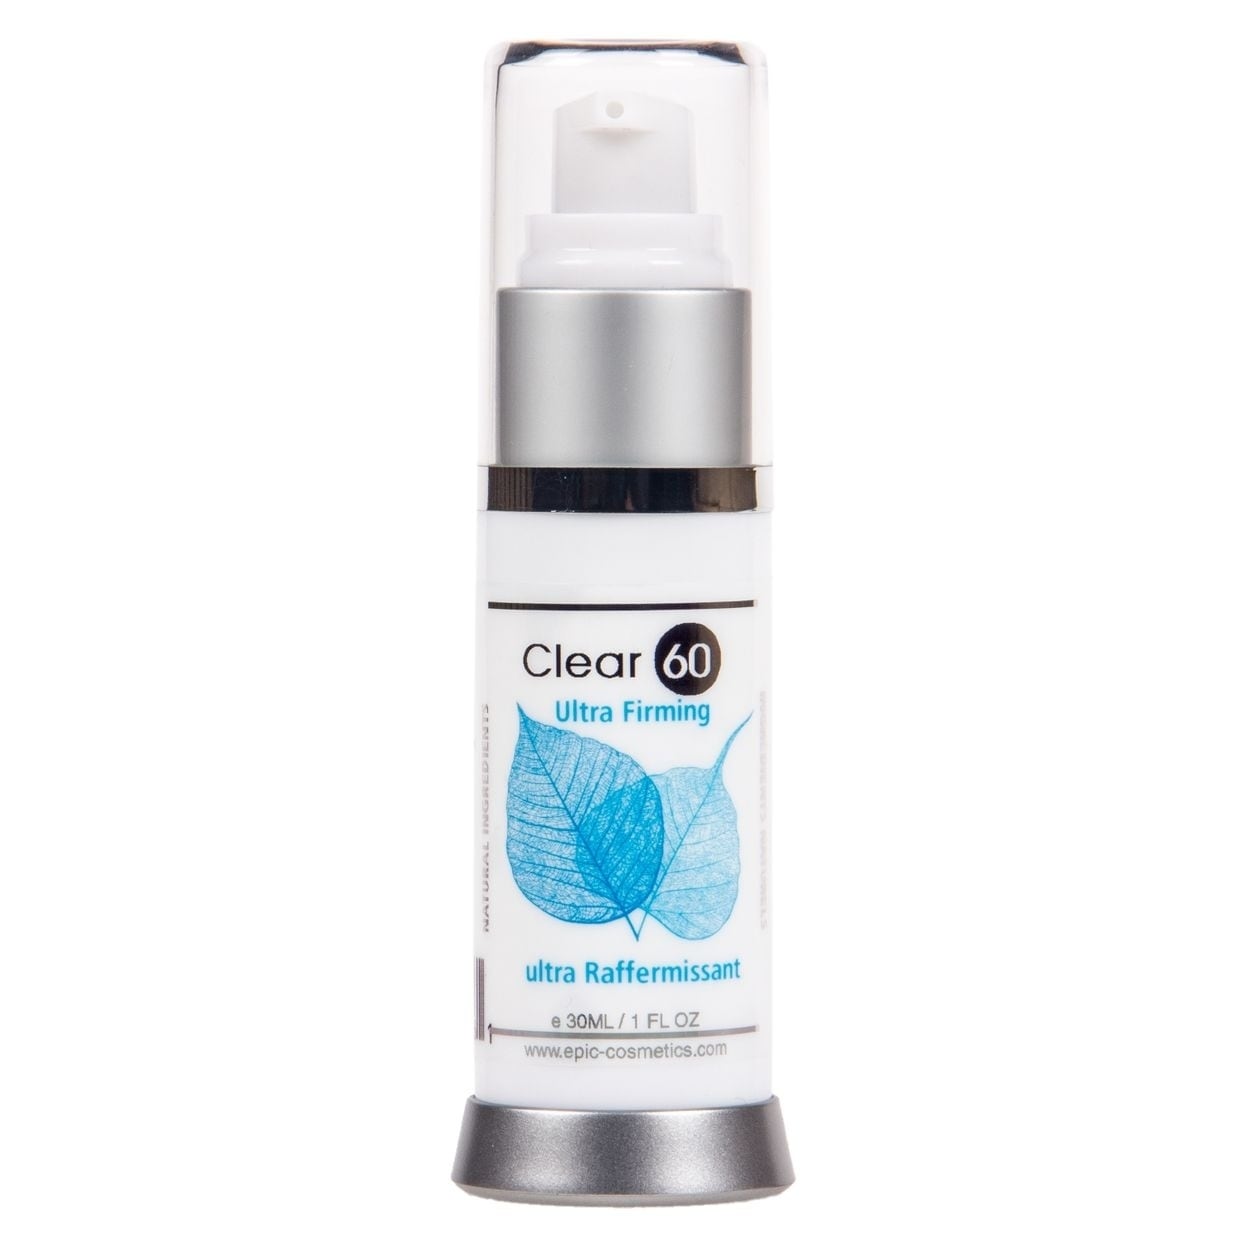 Clear  Ultra Firming 1oz - image 1 of 2